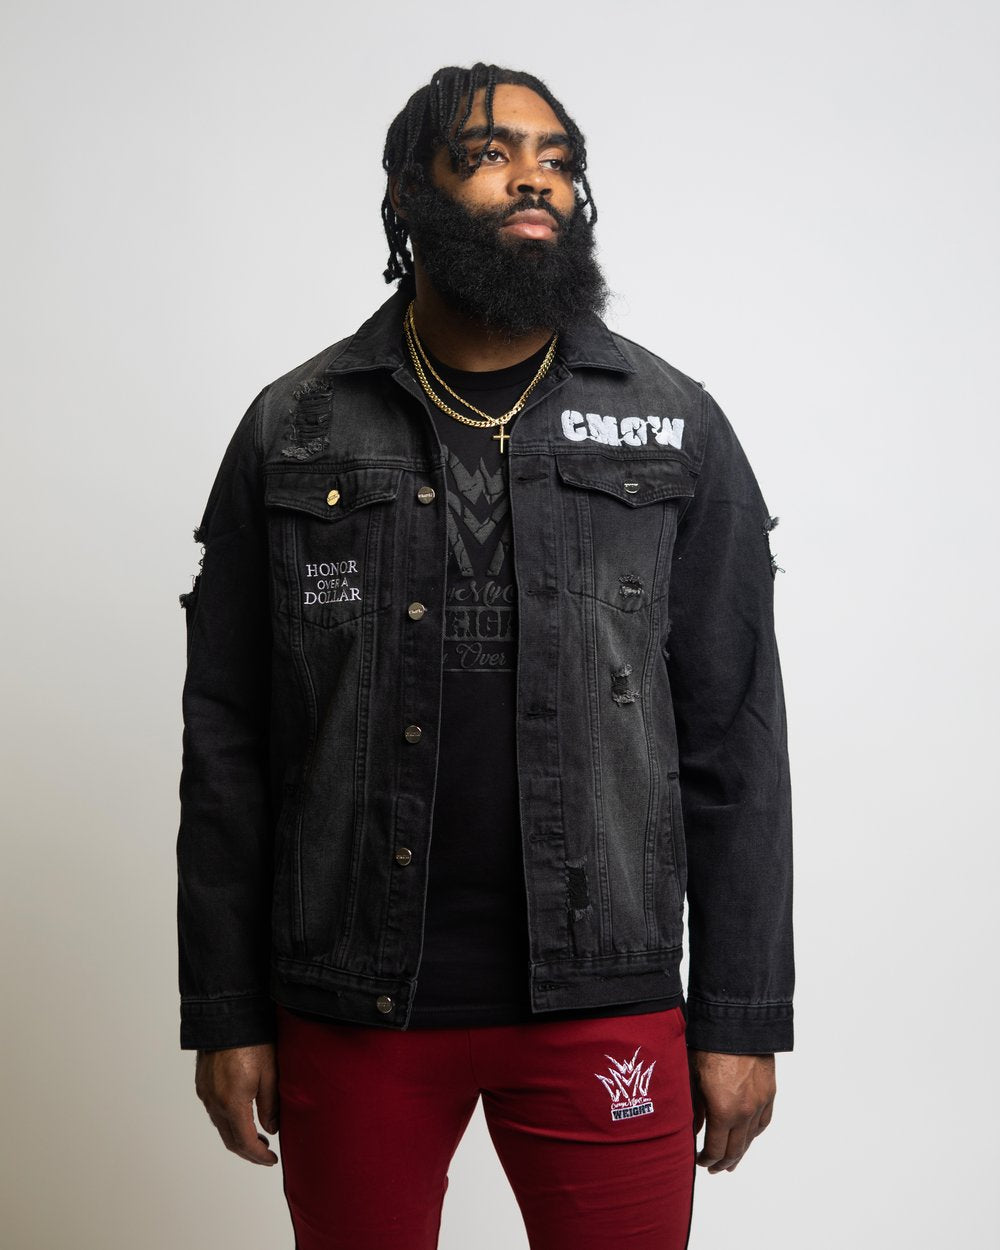 Almighty Carry Jean Jackets – Carry My Own Weight